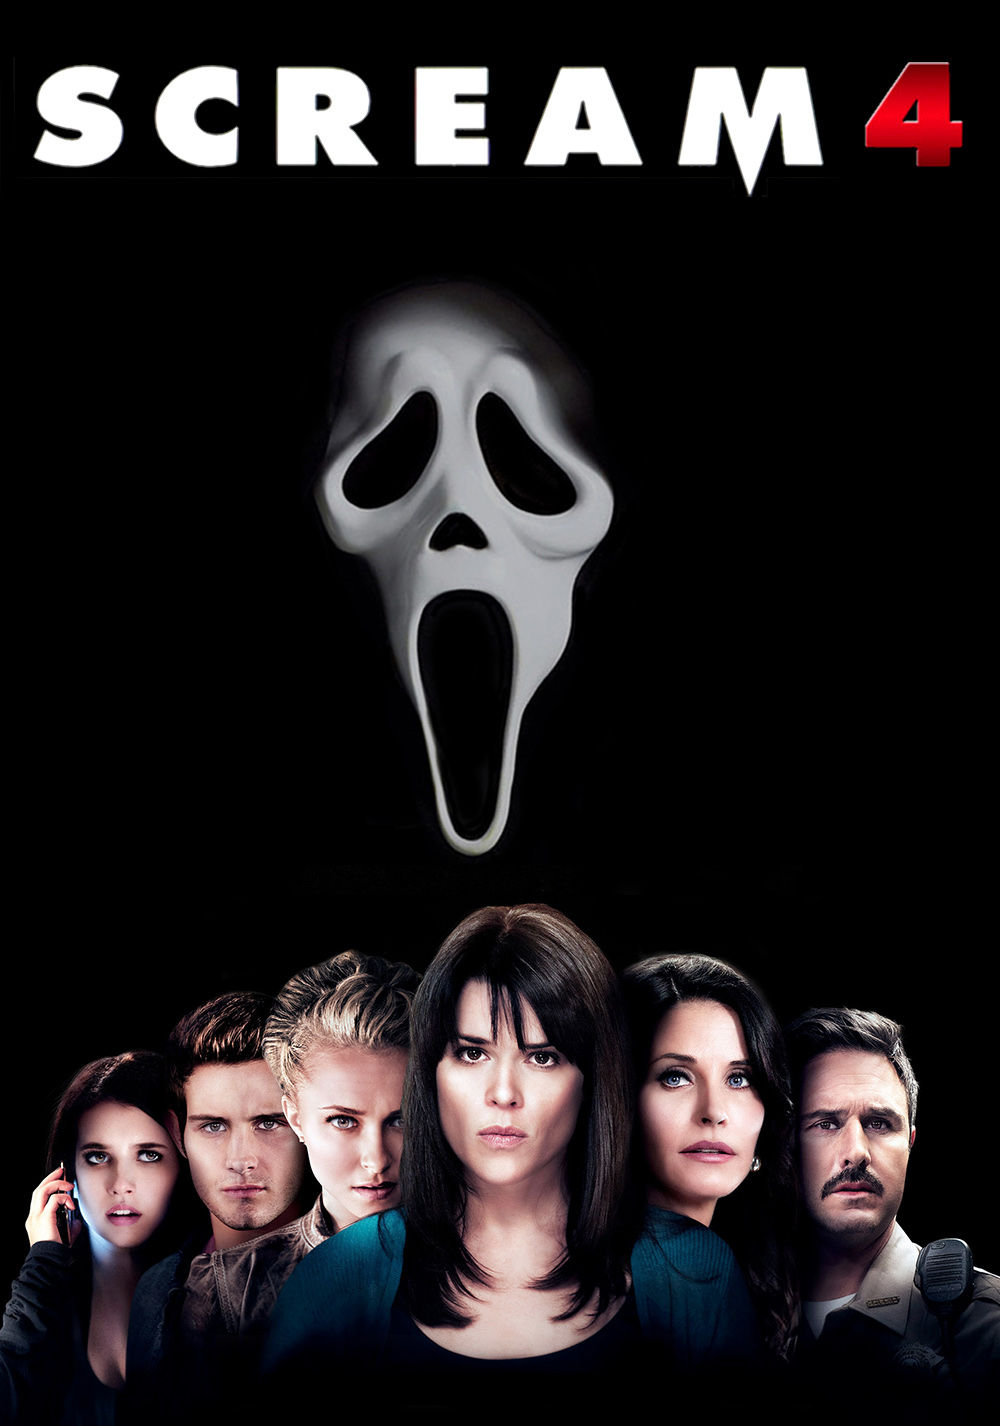 Scream 4 Picture Image Abyss